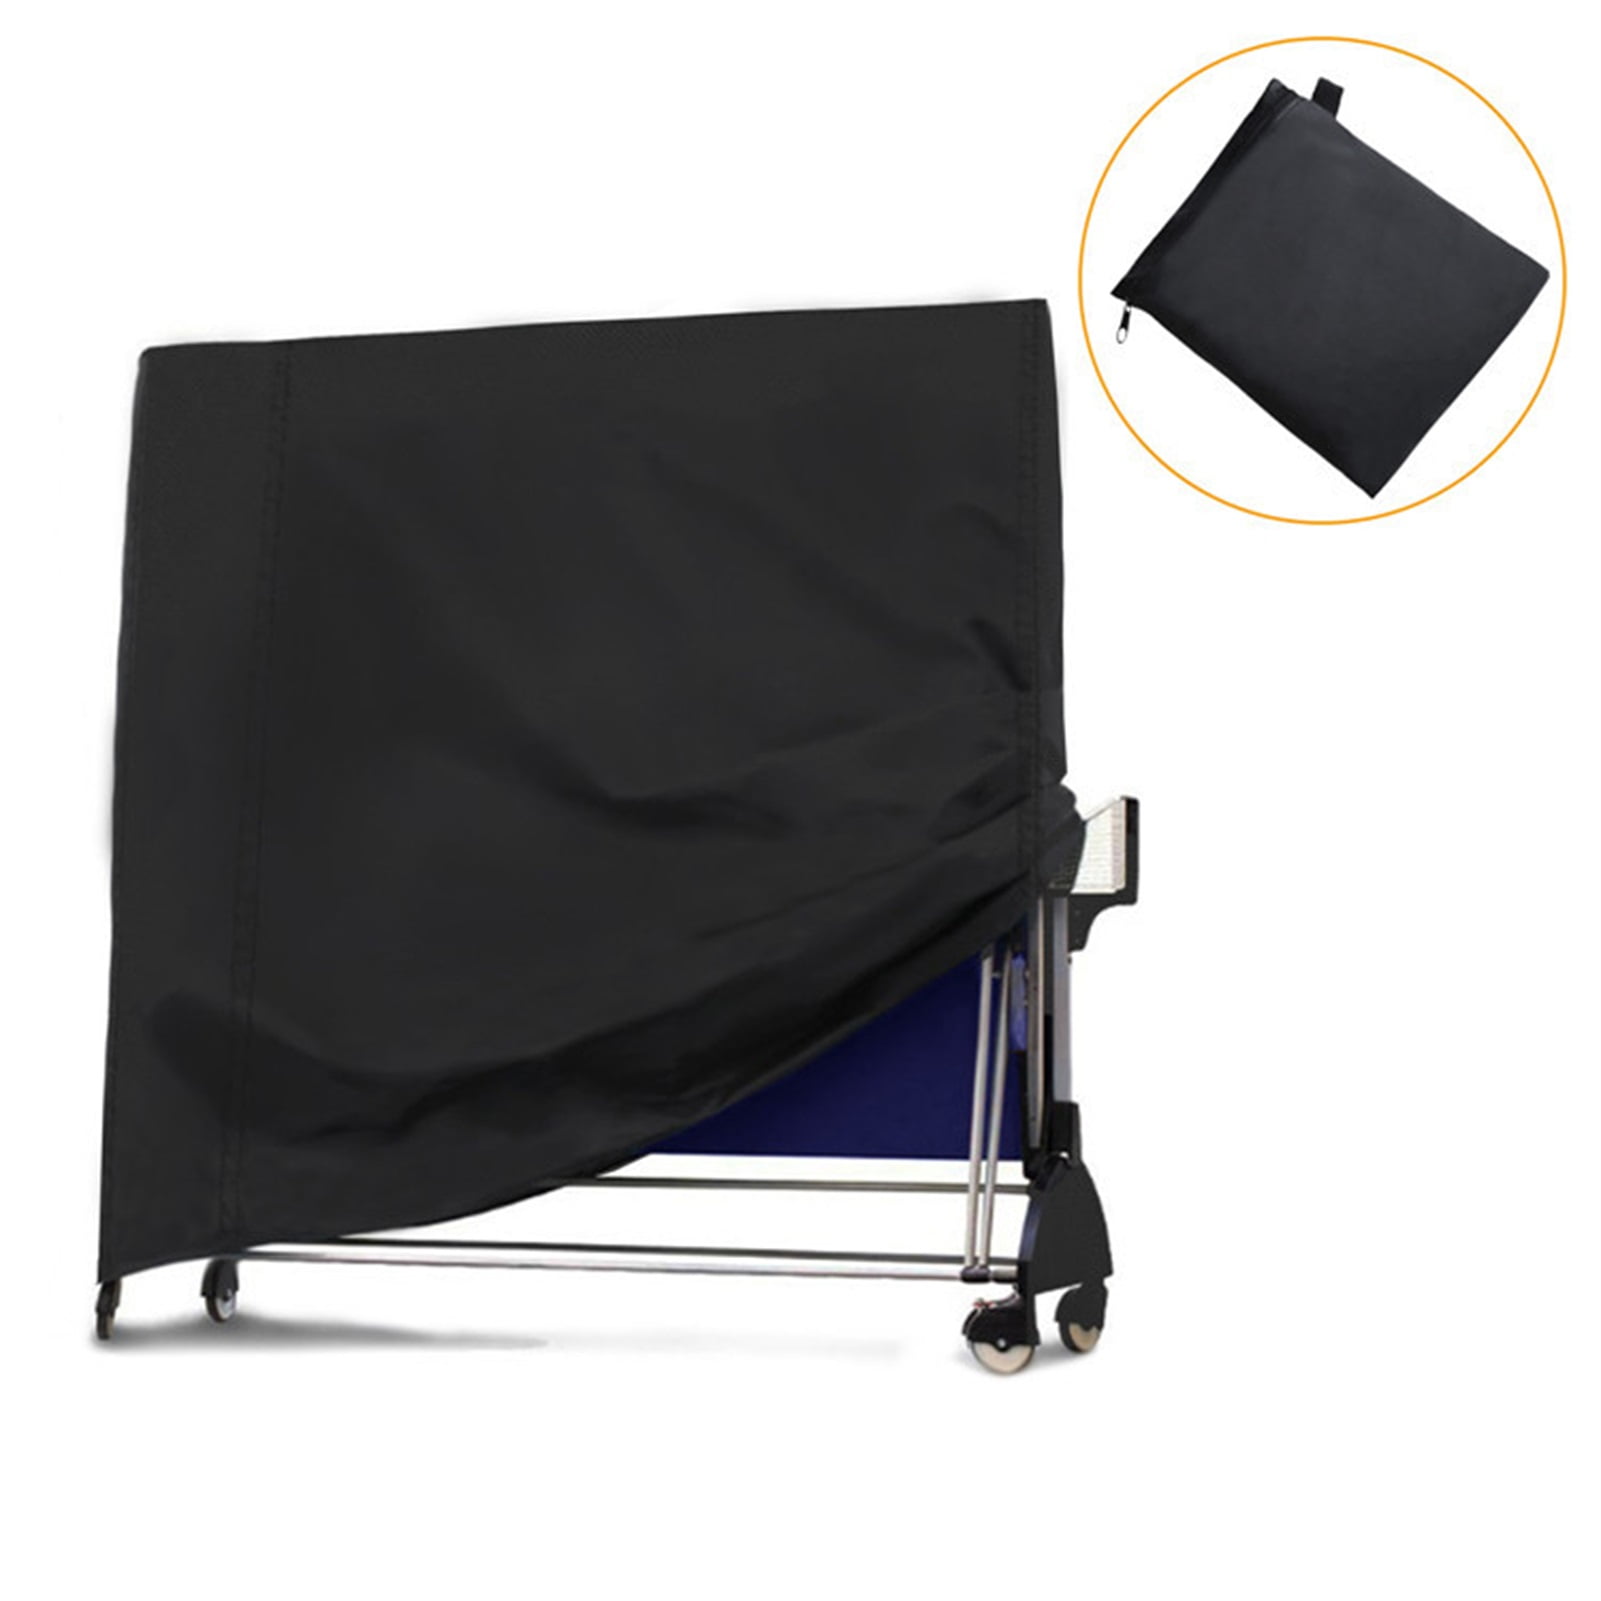 Details about   Table Tennis/Ping Pong Table Cover Protector Indoor/Outdoor Dustproof Waterproof 